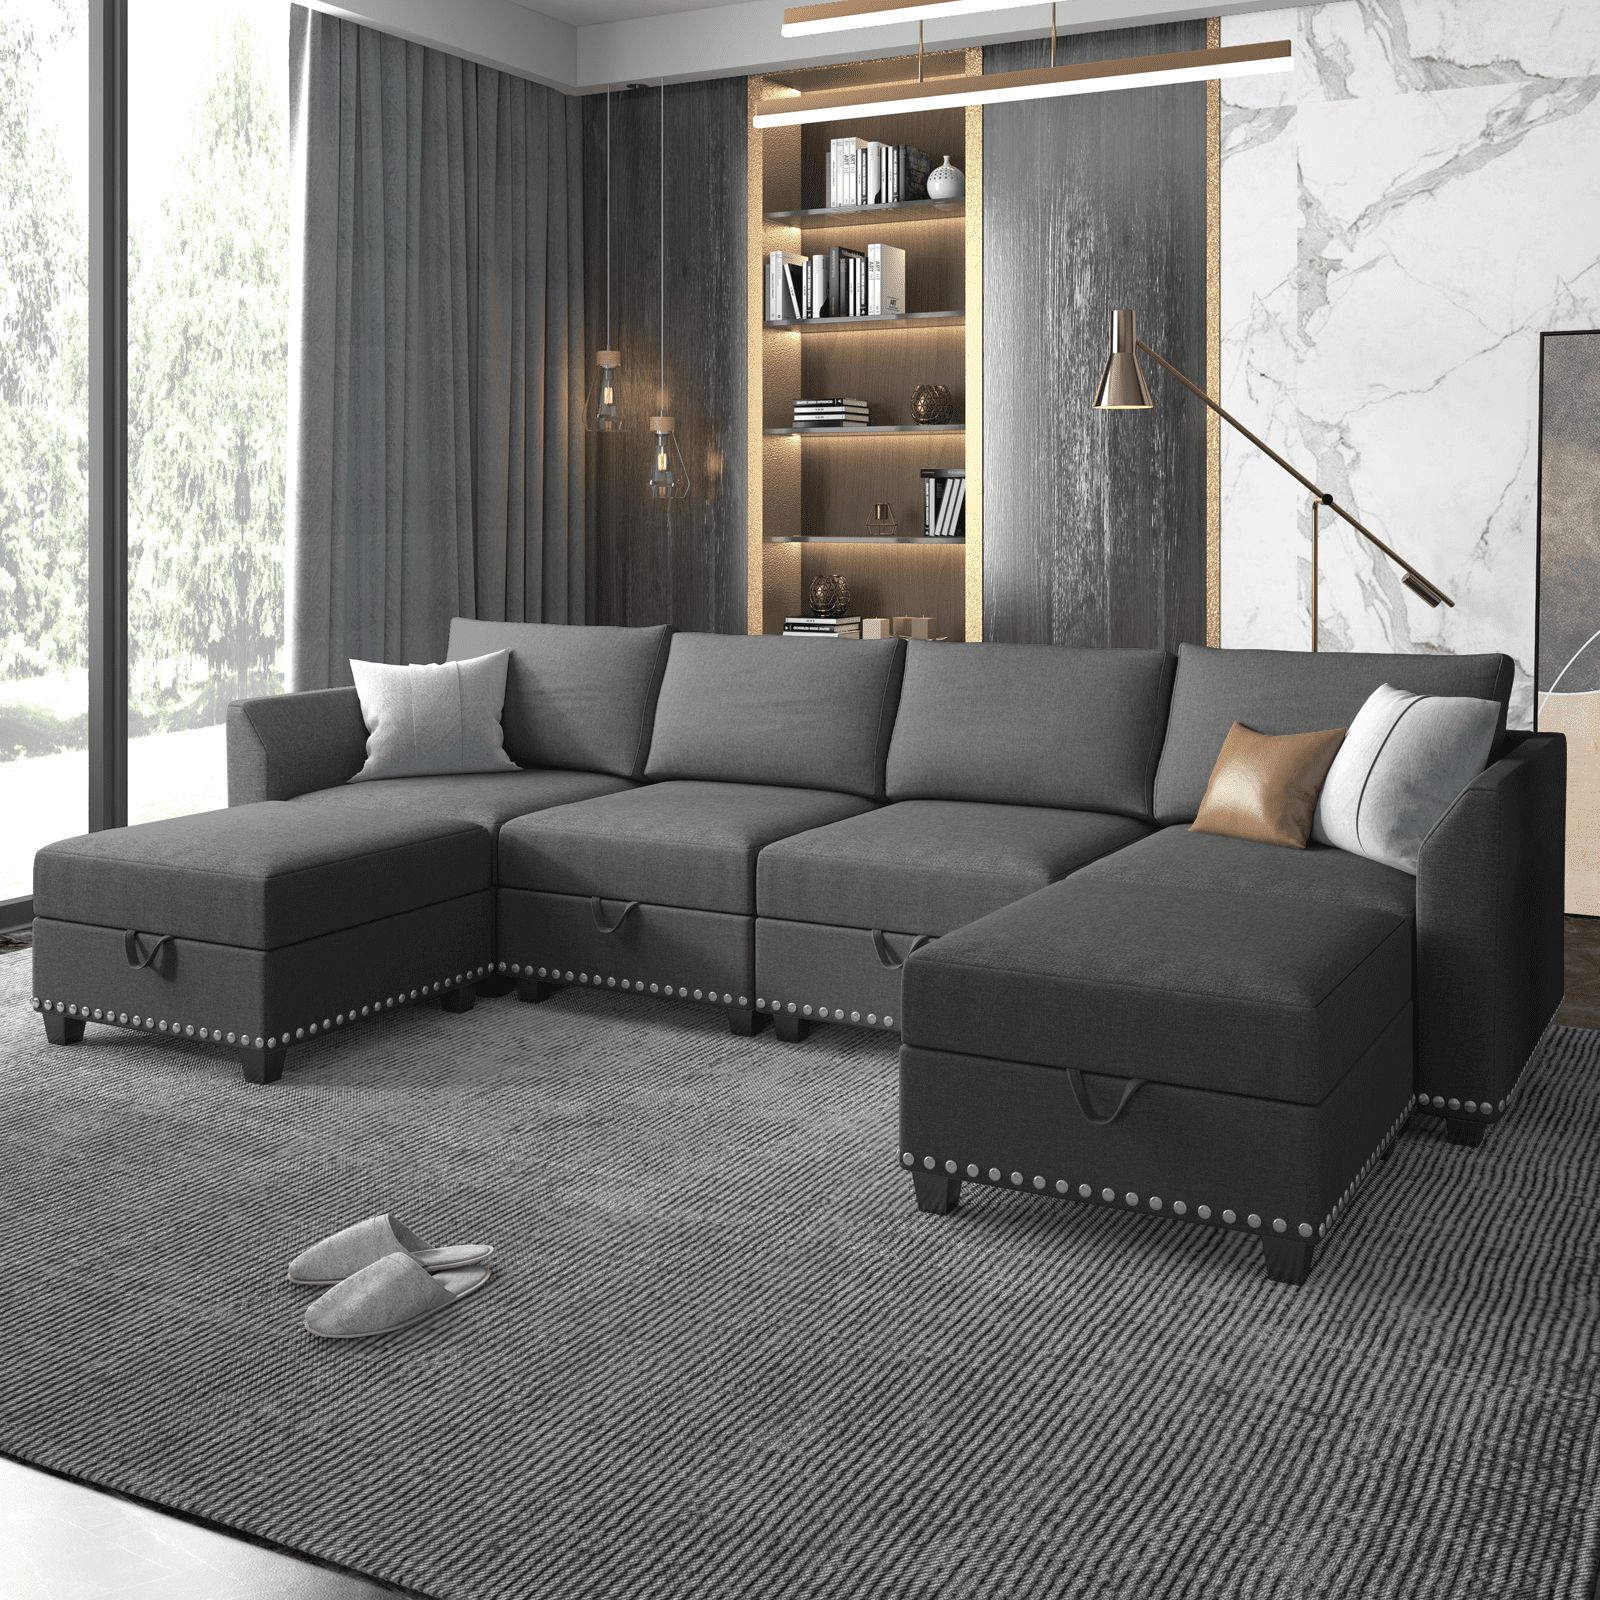 Mjkone U Shaped Sectional Sofa With Storage, 6 Seater Modular Sectional Sofa  With Nailhead Trim, Oversized Sleeper Sofa Couch Bed, Convertible Couches  For Living Room,free Combination (dark Grey） – Walmart Within 6 Seater Sectional Couches (Gallery 11 of 20)